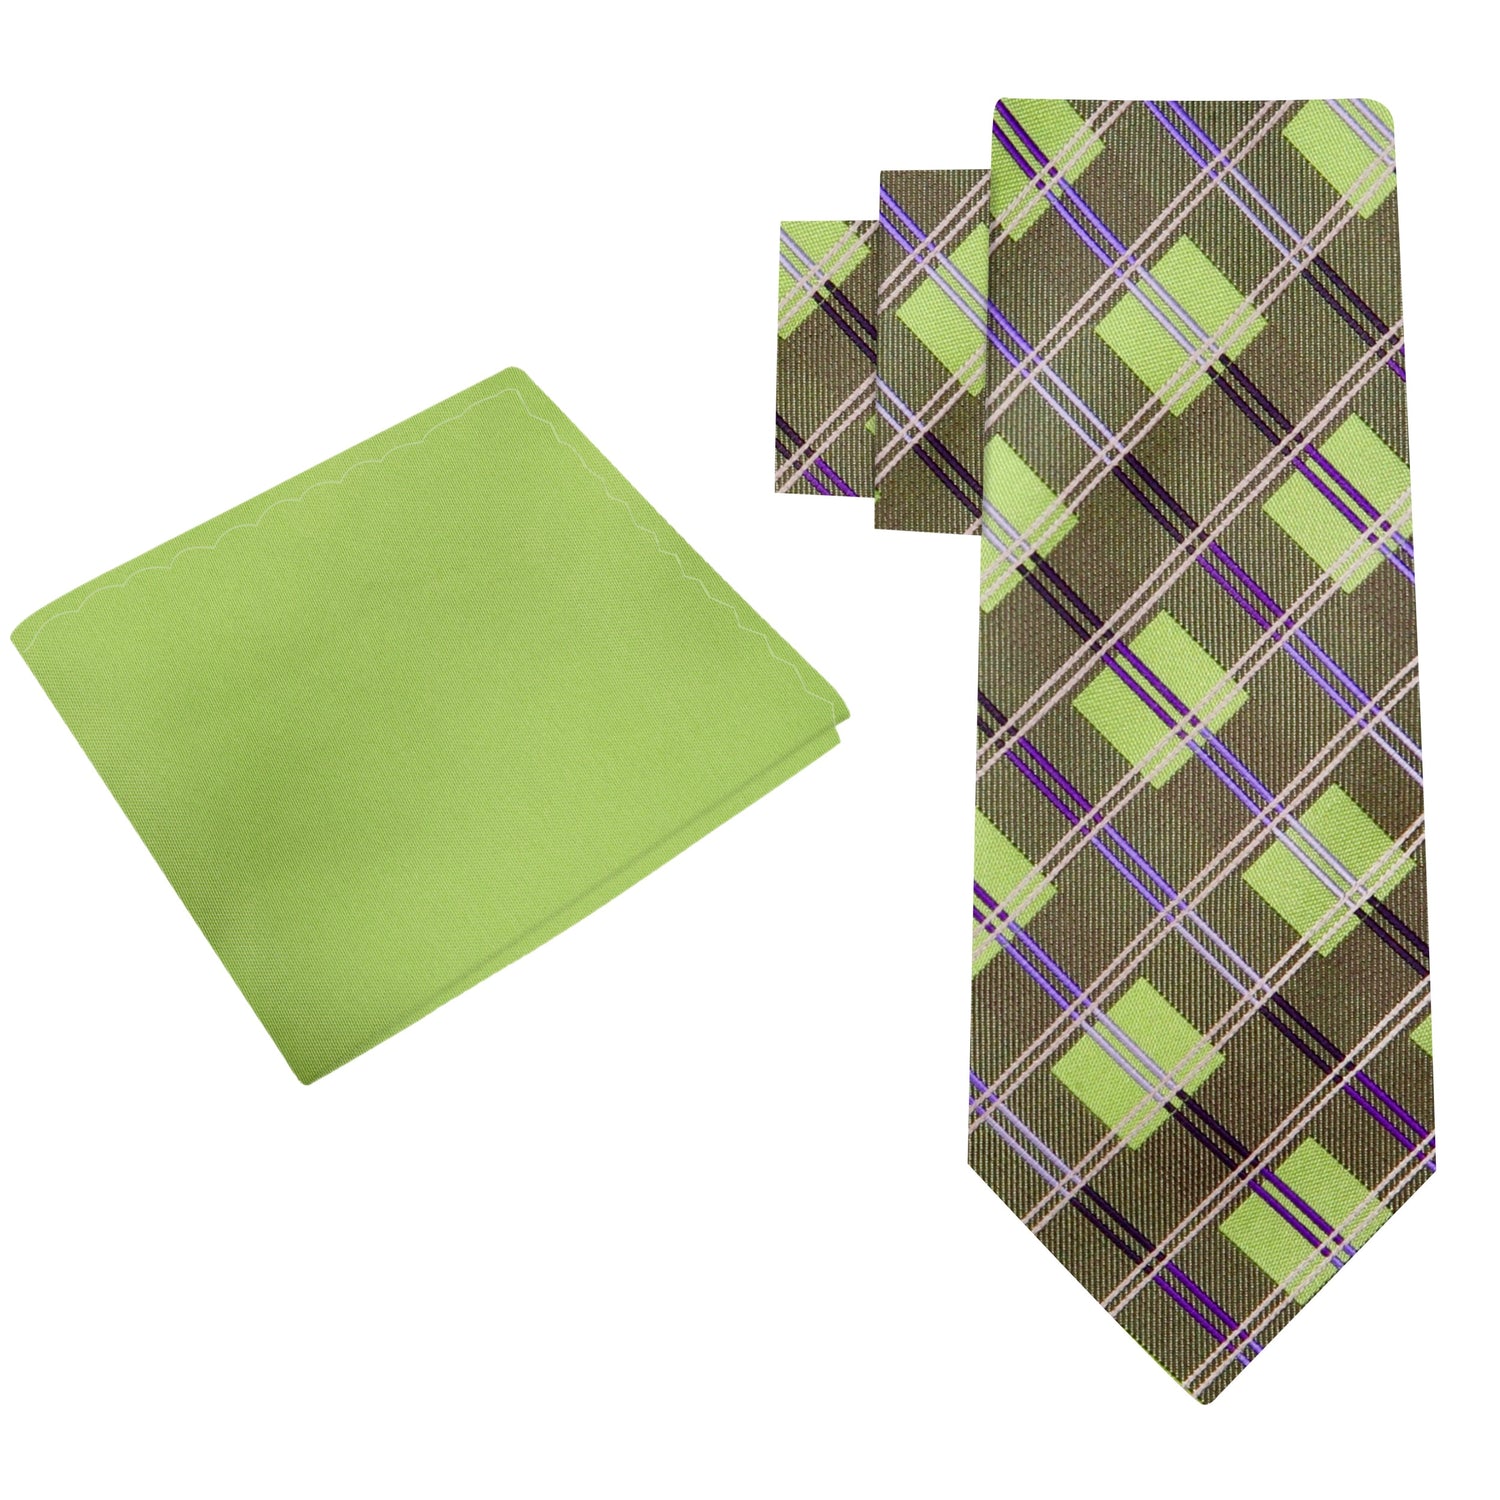 View 2: Green Argyle Tie and Light Green Square